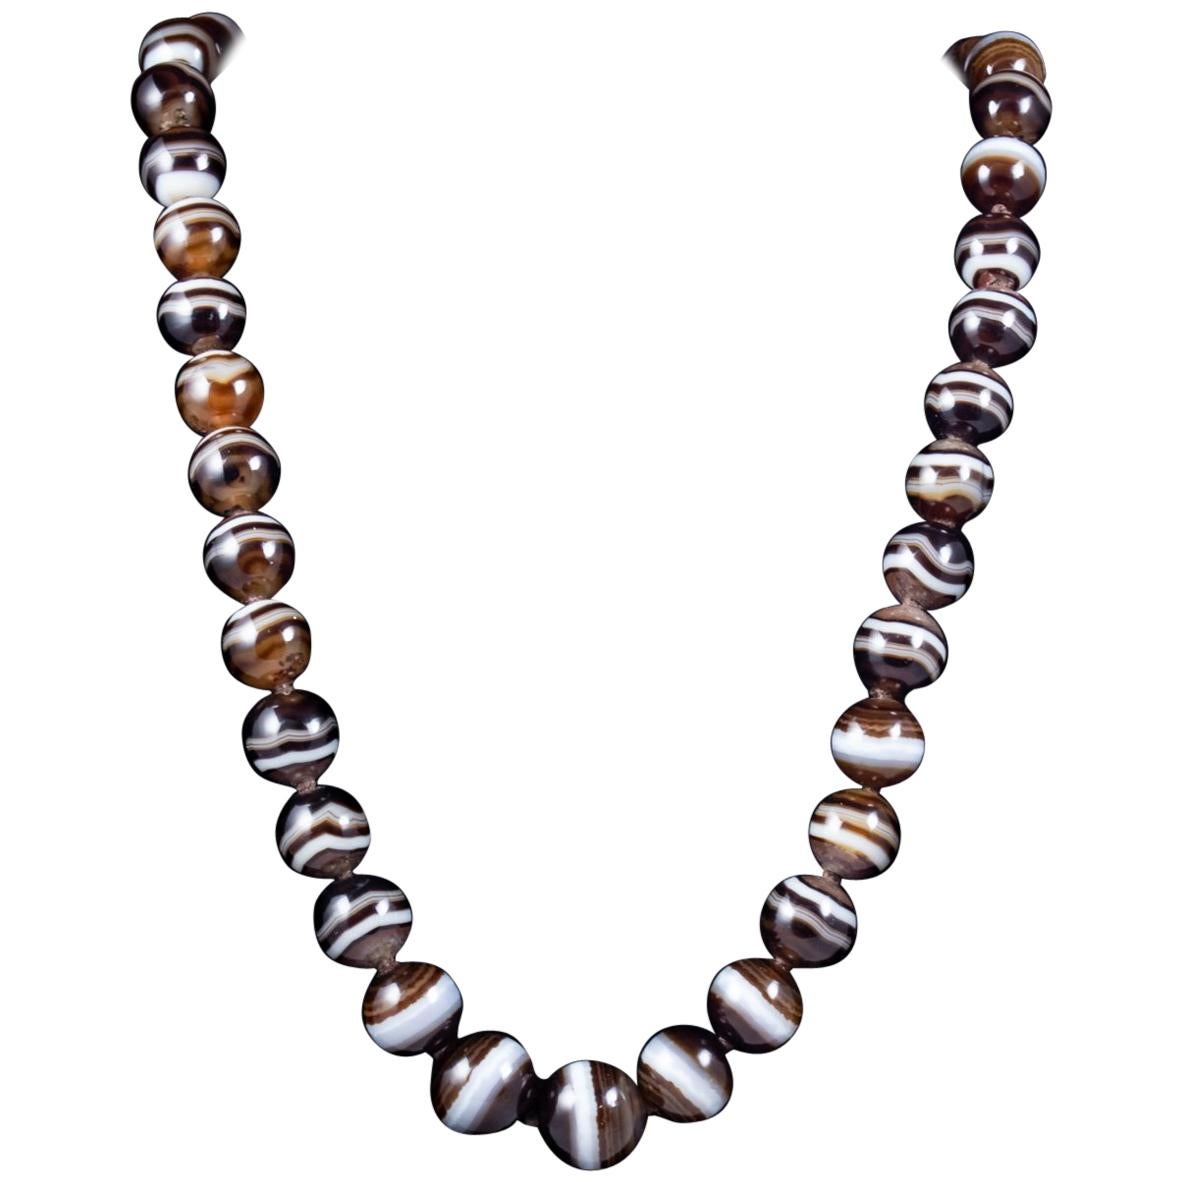 Antique Victorian Bullseye Agate Bead Necklace, circa 1900 For Sale